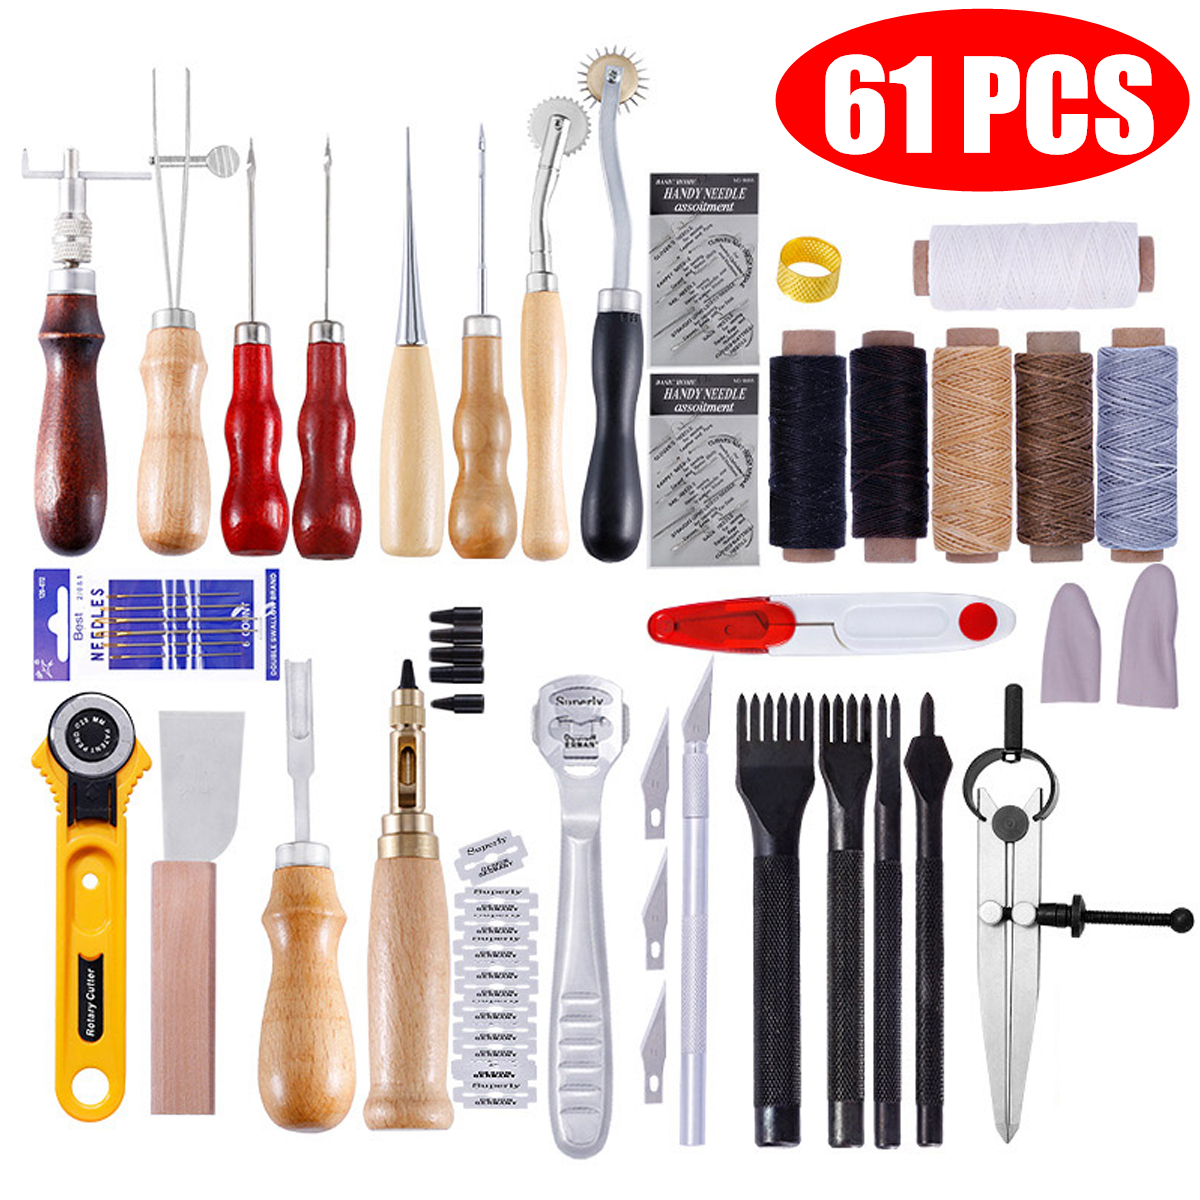 61Pcs-Leather-Craft-Tool-Kit-Hand-Sewing-Stitching-Punch-Carving-Saddle-Edger-1570180-2